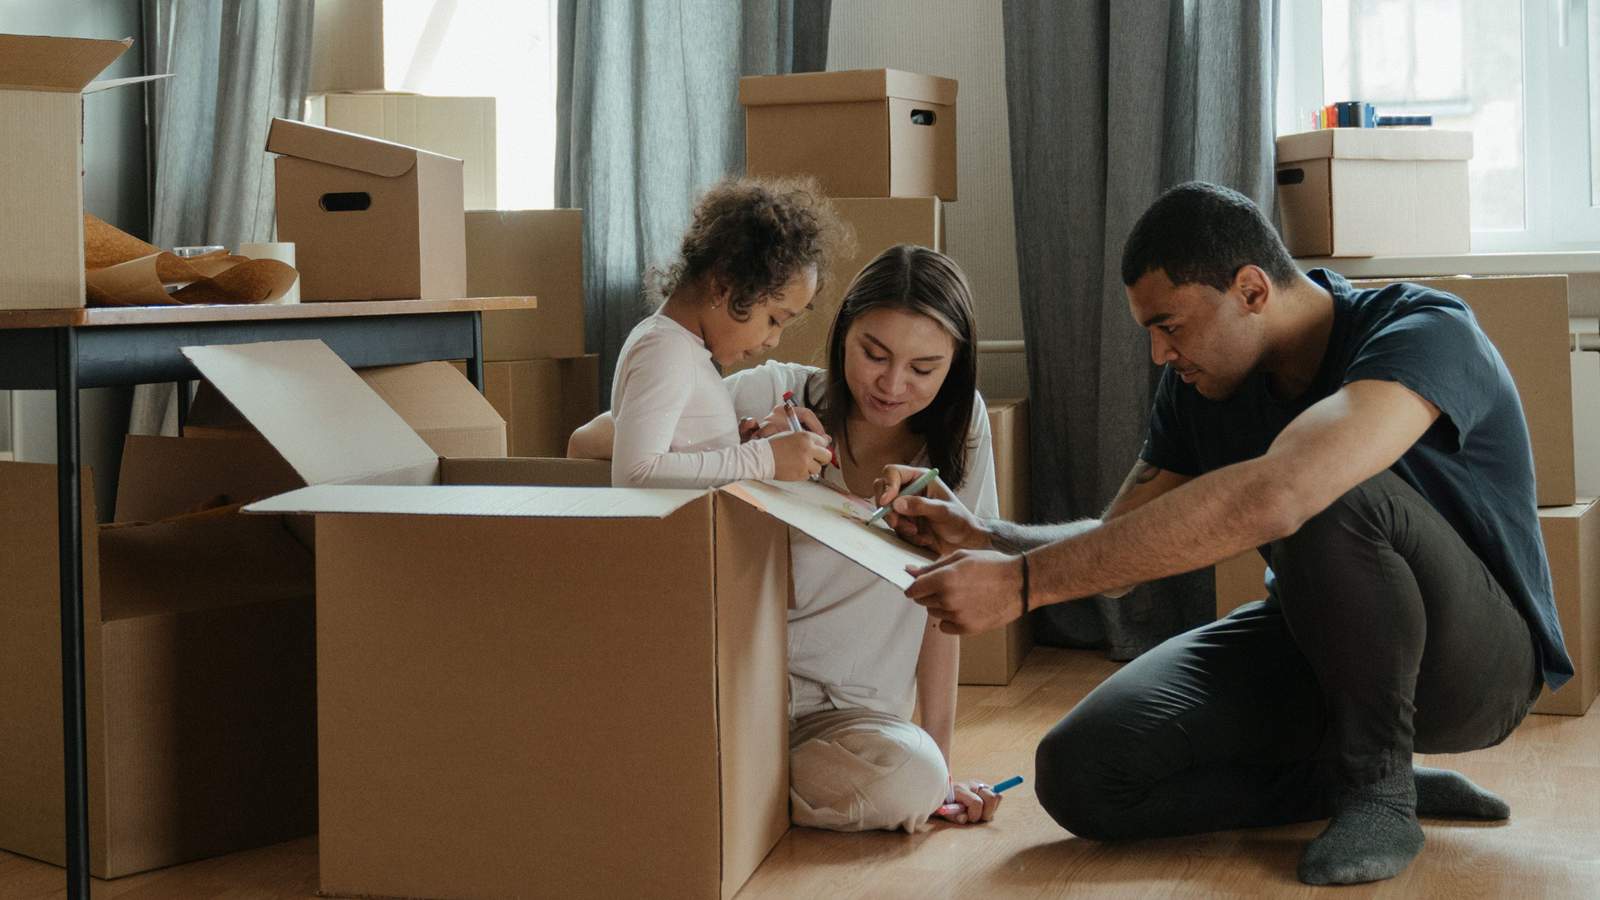 This might be the best time in history for you to move, experts say